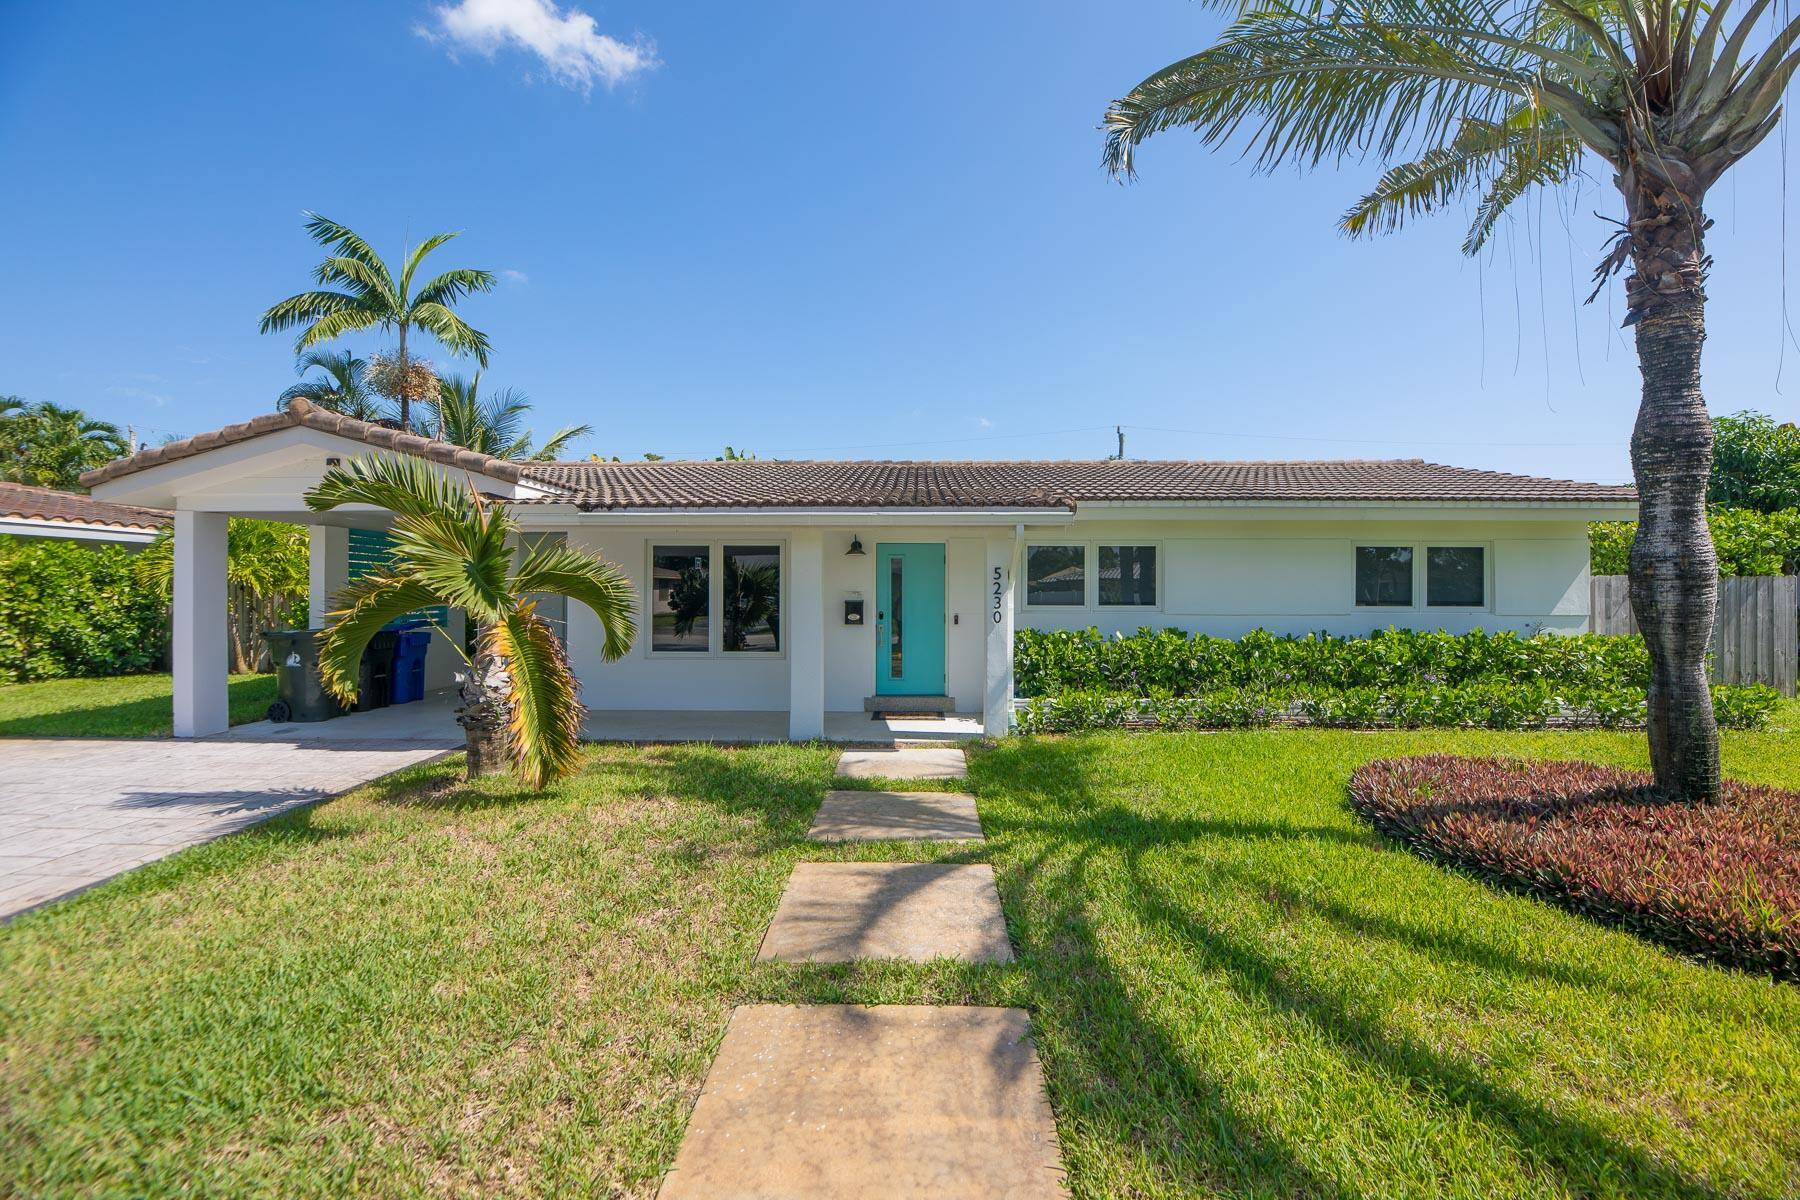 Welcome to this beautiful tropical oasis located in east Fort Lauderdale.